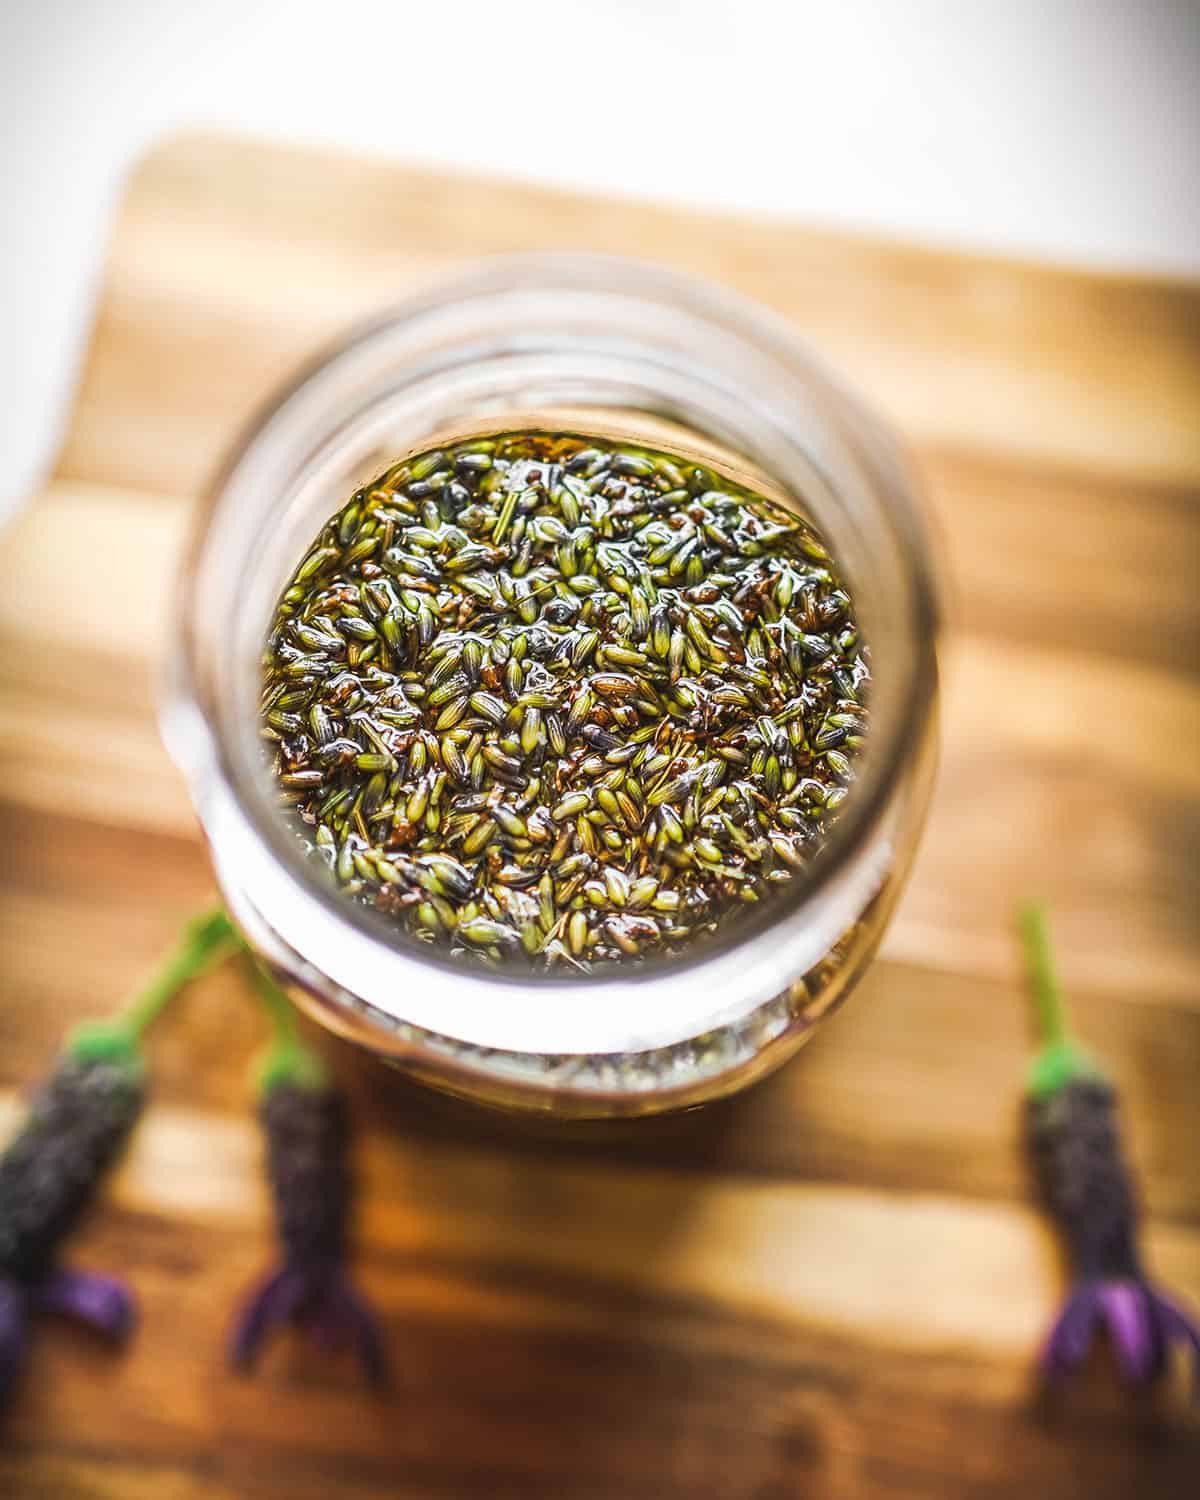 Lavender oil infusing in a jar, top view.